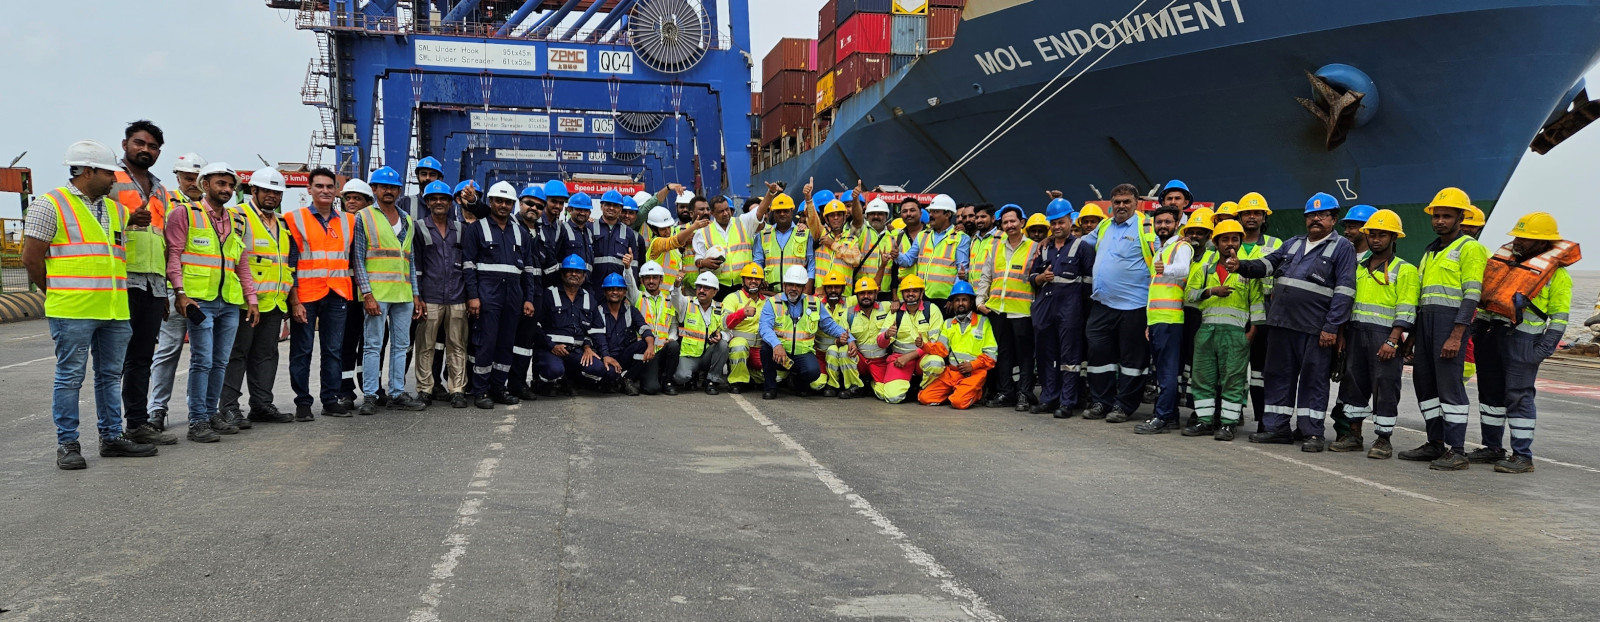 APM terminals Pipavav sets record: over 200 cargo movements per hour on single ship